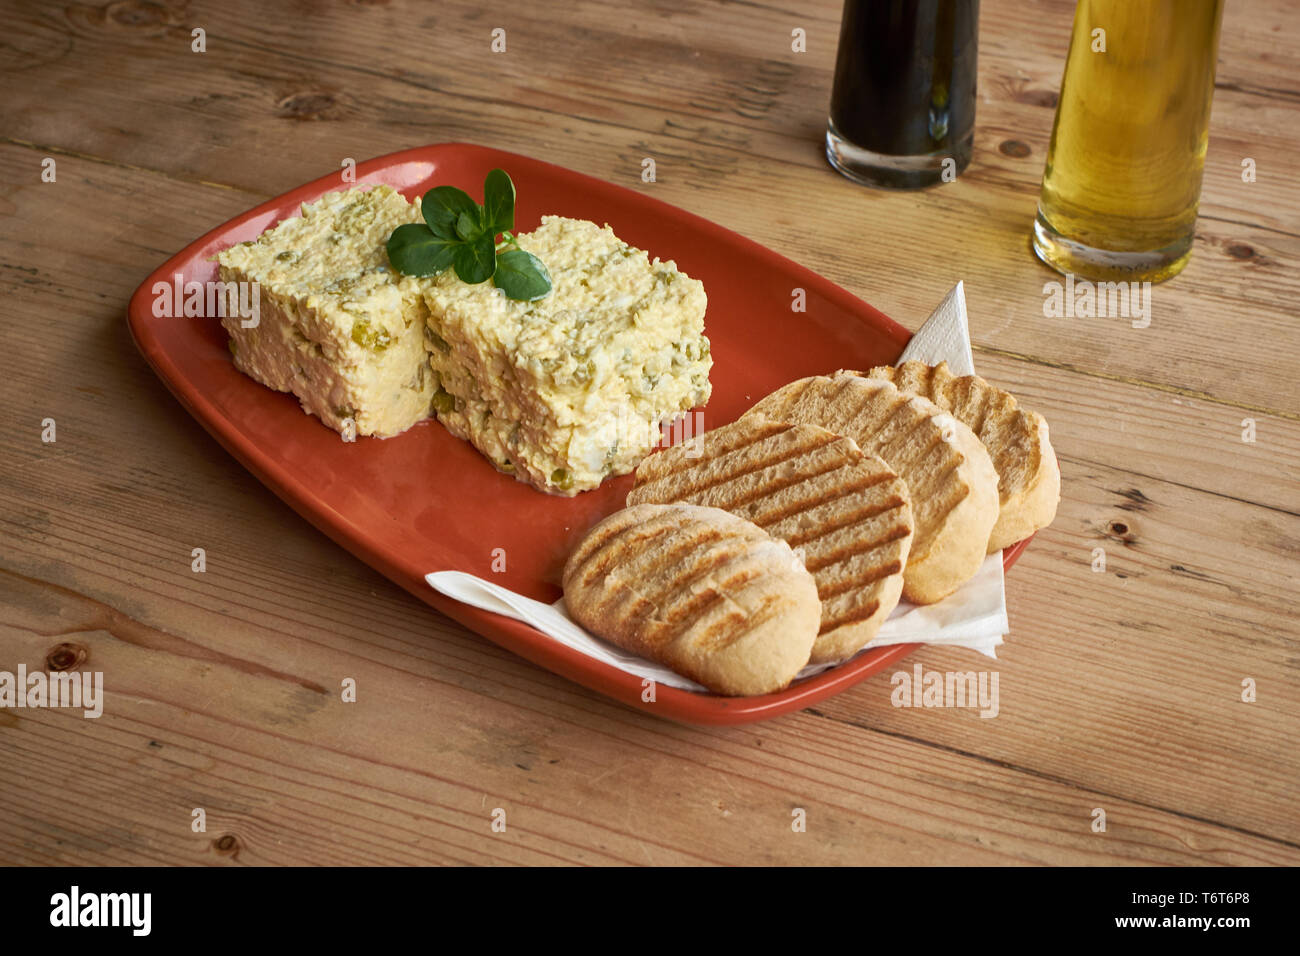 Olivieh Salad on a red plate and wooden table Stock Photo